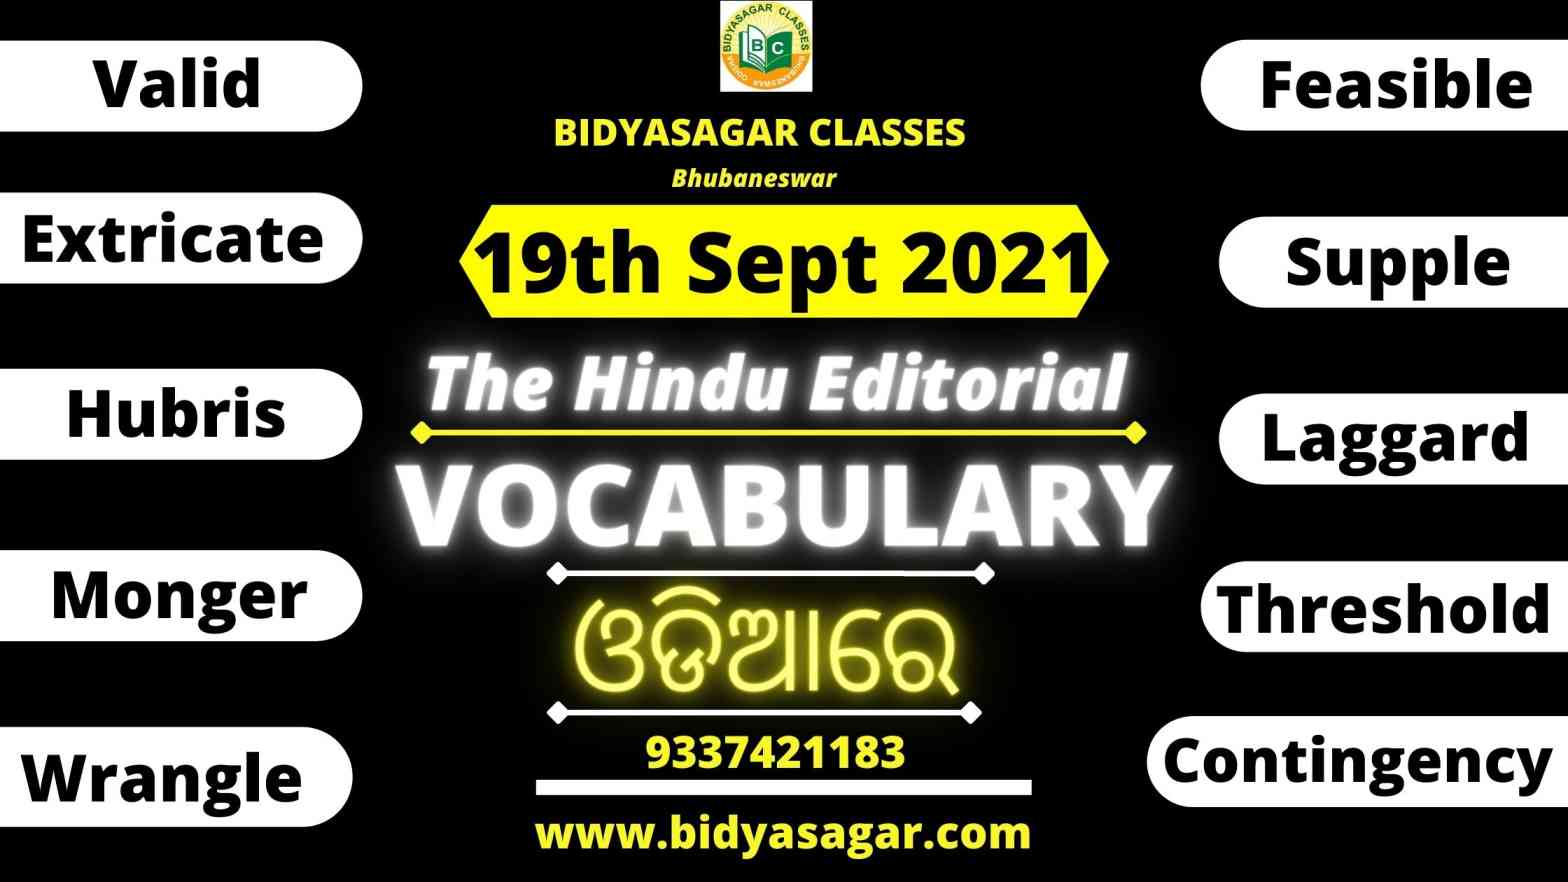 The Hindu Editorial Vocabulary of 19th September 2021